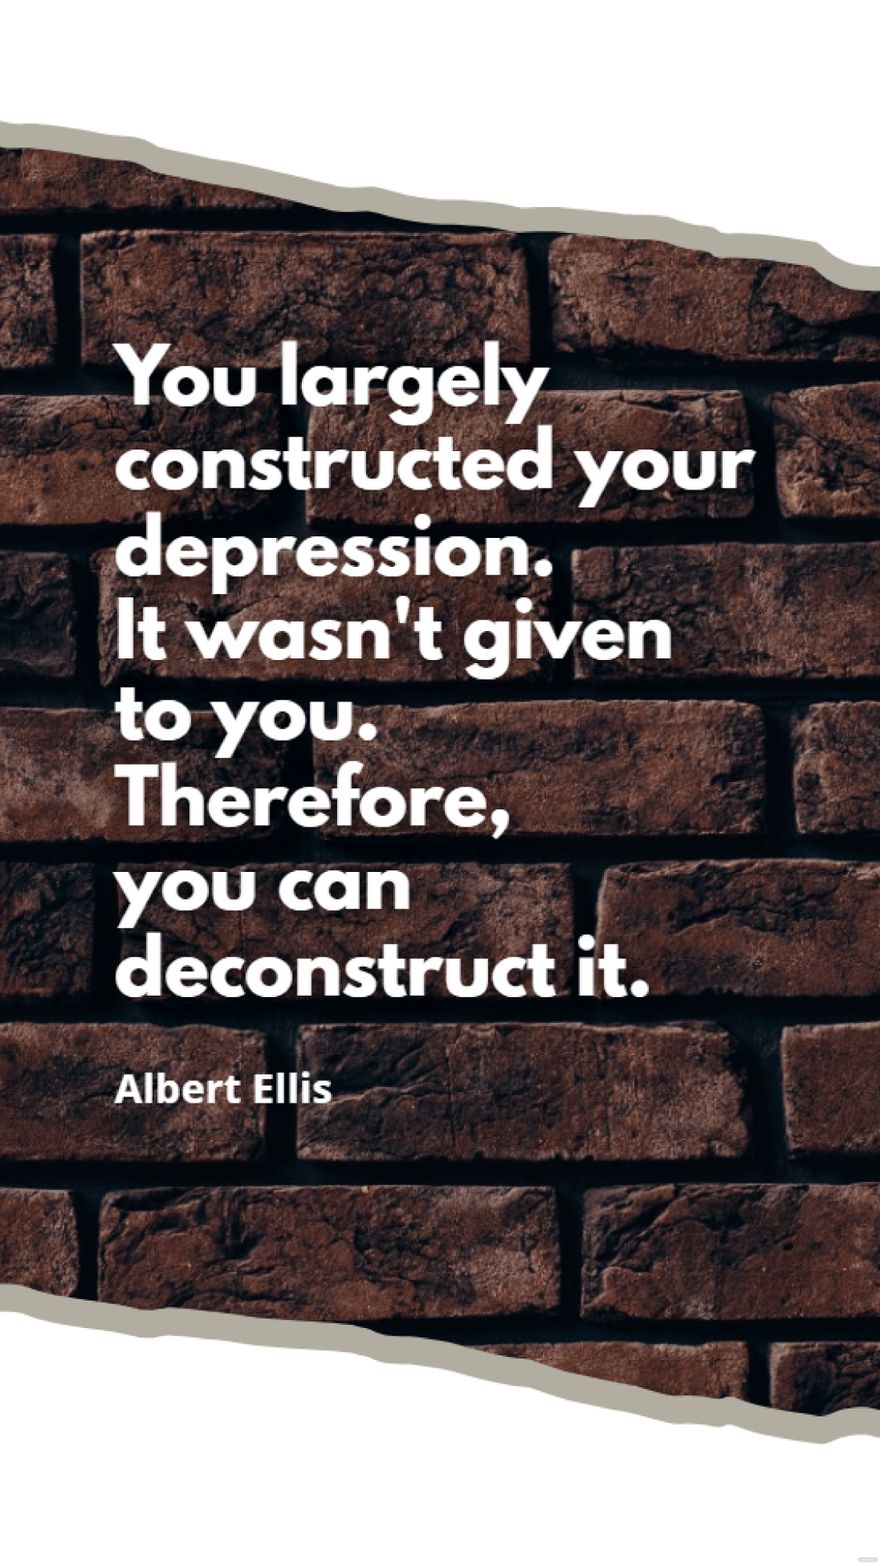 Albert Ellis  You largely constructed your depression It wasnt given to you Therefore you can deconstruct it